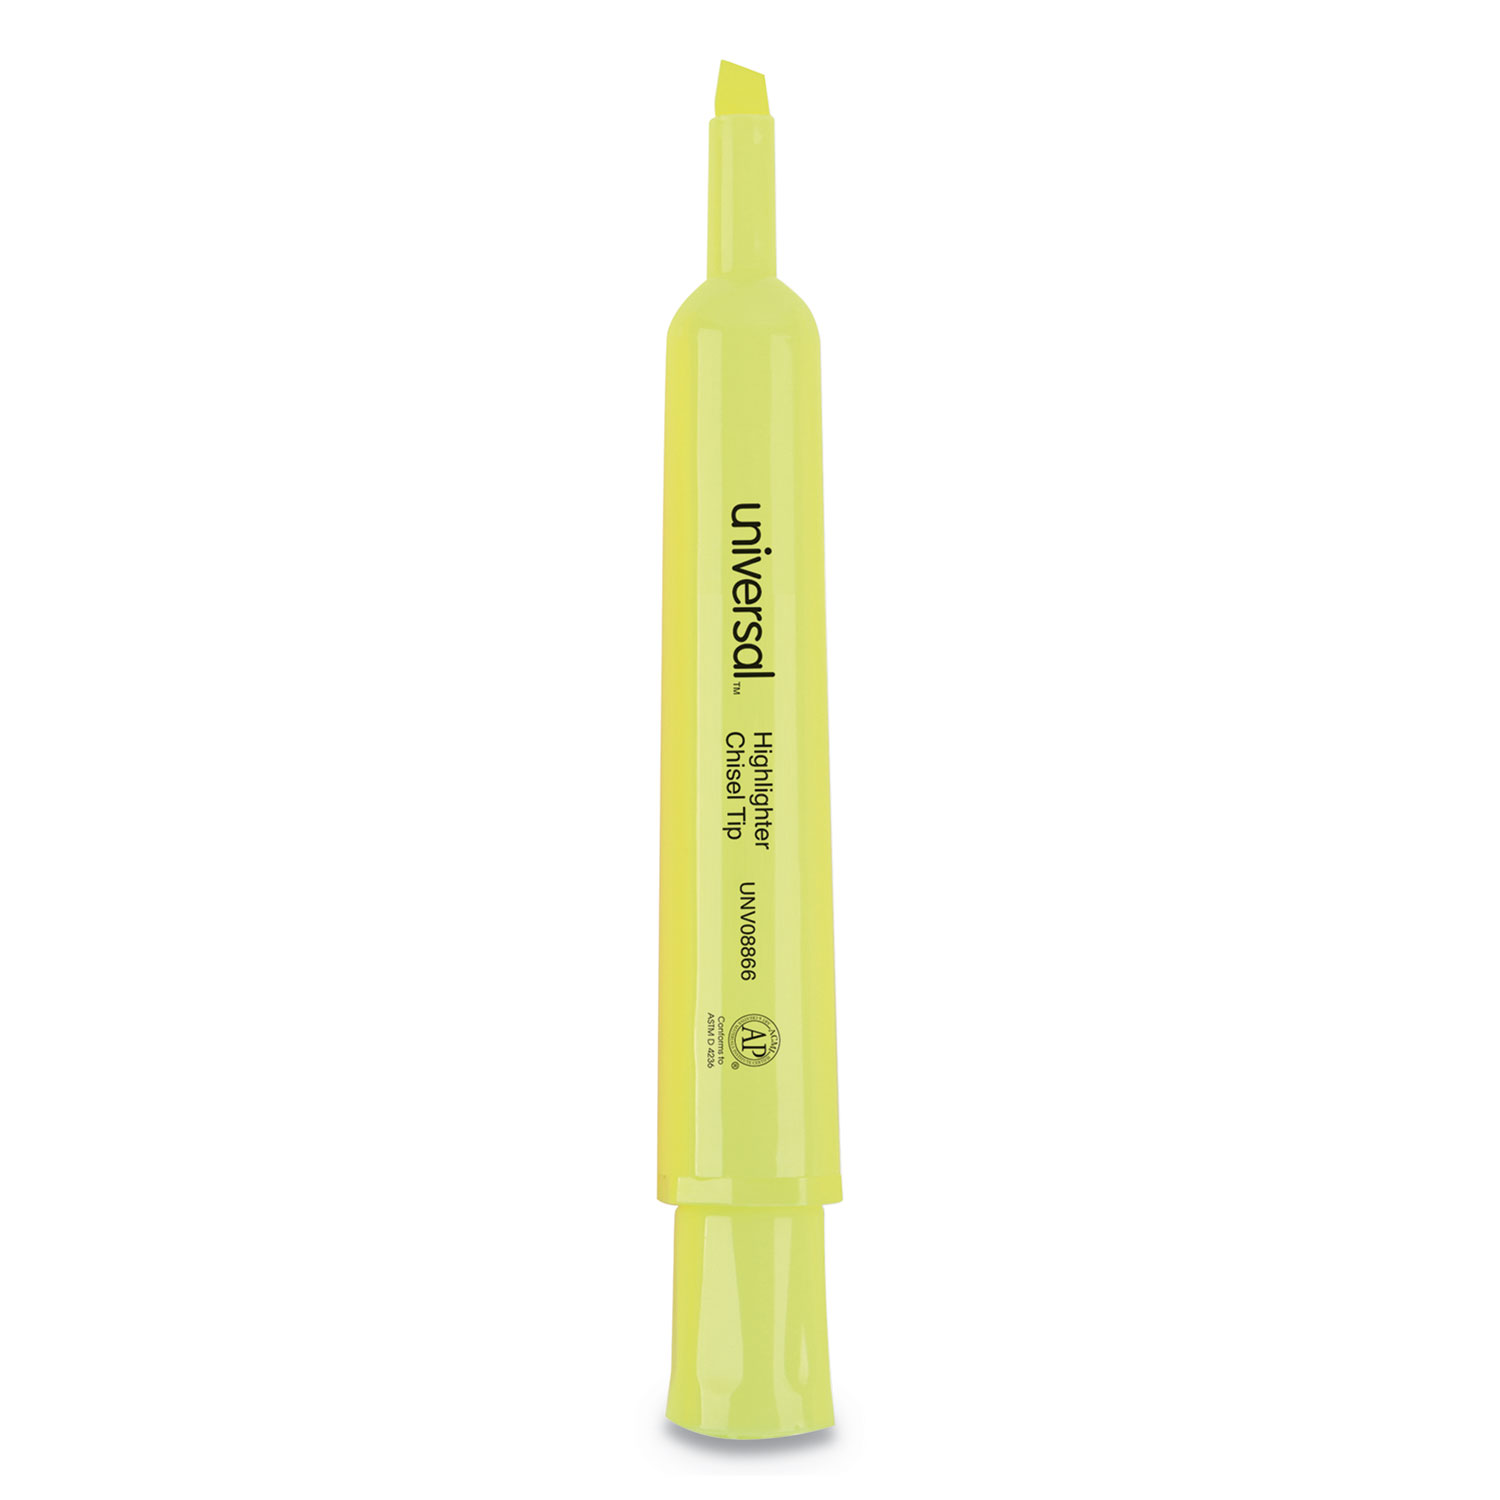  Universal UNV08866 Desk Highlighters, Chisel Tip, Fluorescent Yellow, 36/Pack (UNV08866) 